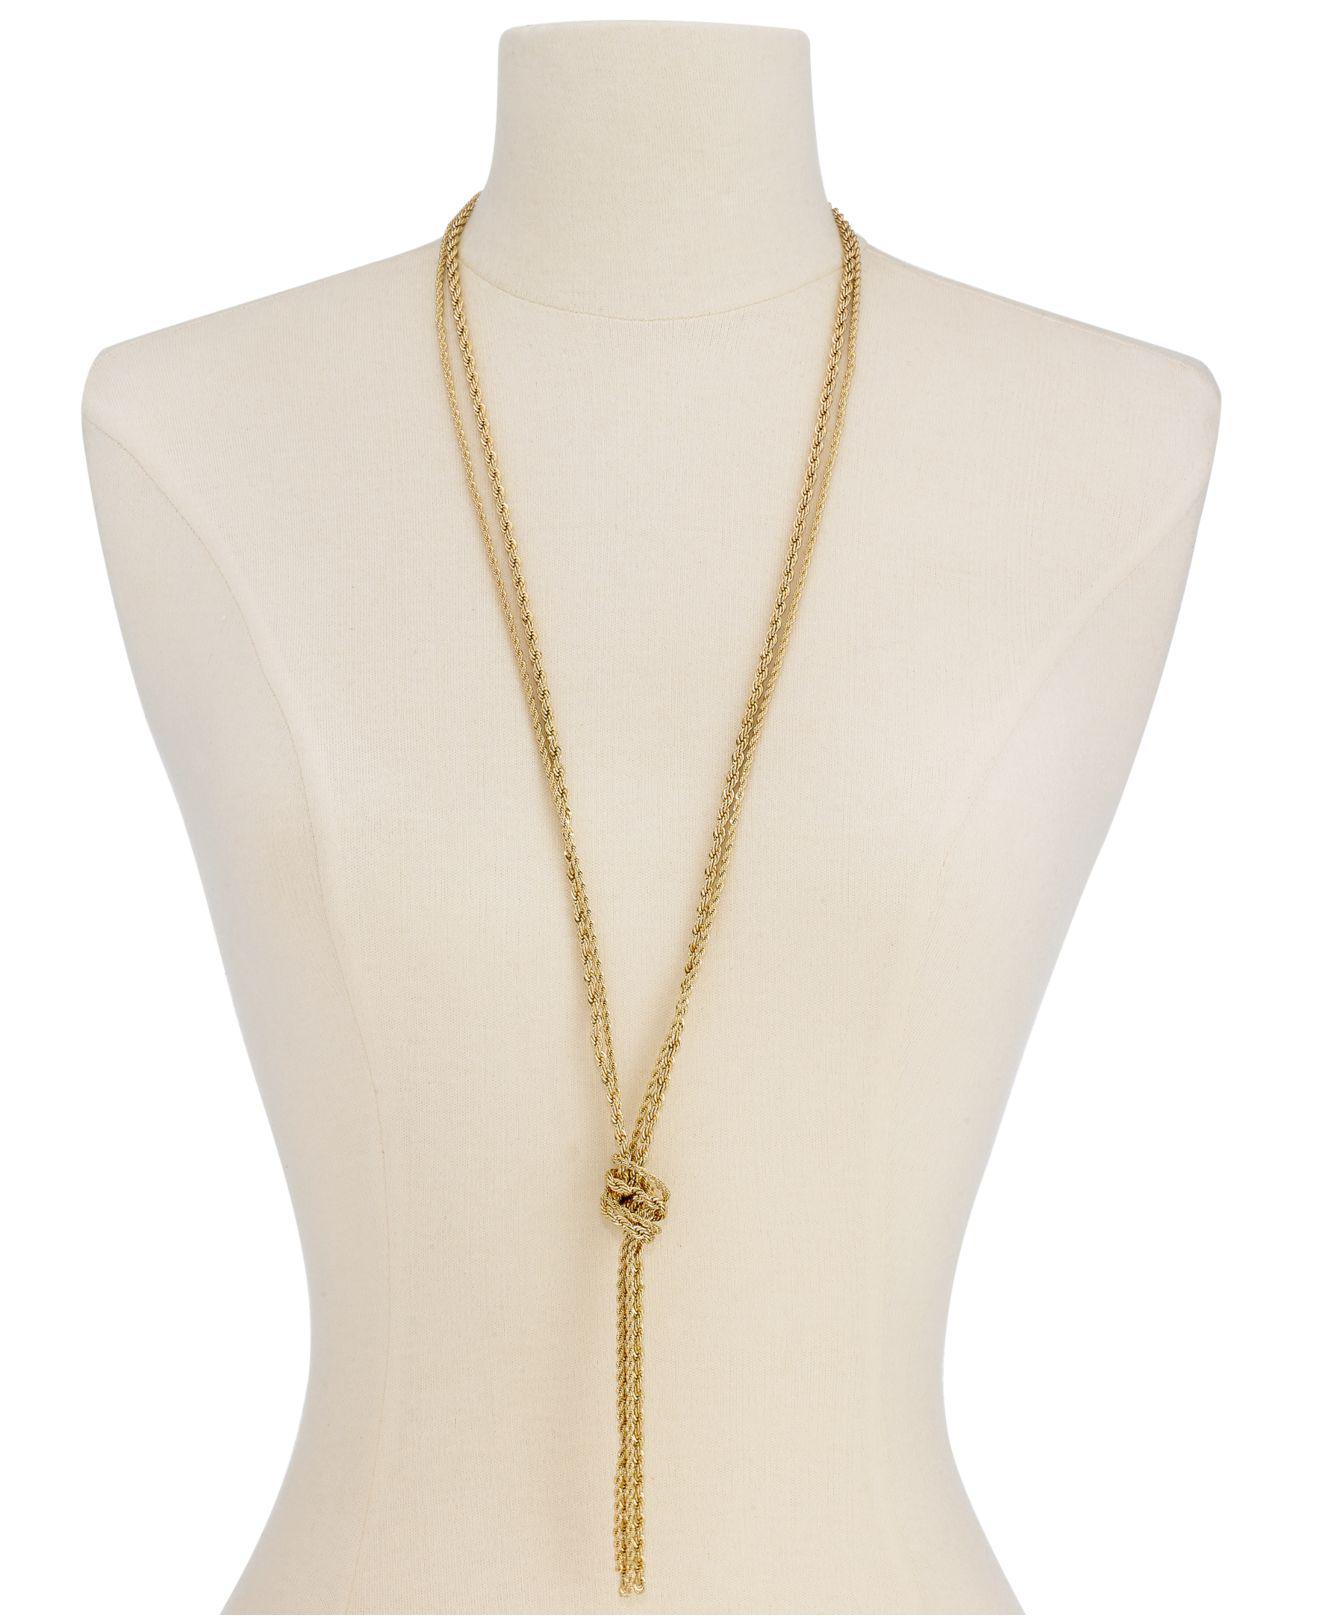 Lyst Charter Club Goldtone Double Rope Knotted Lariat Necklace, 32